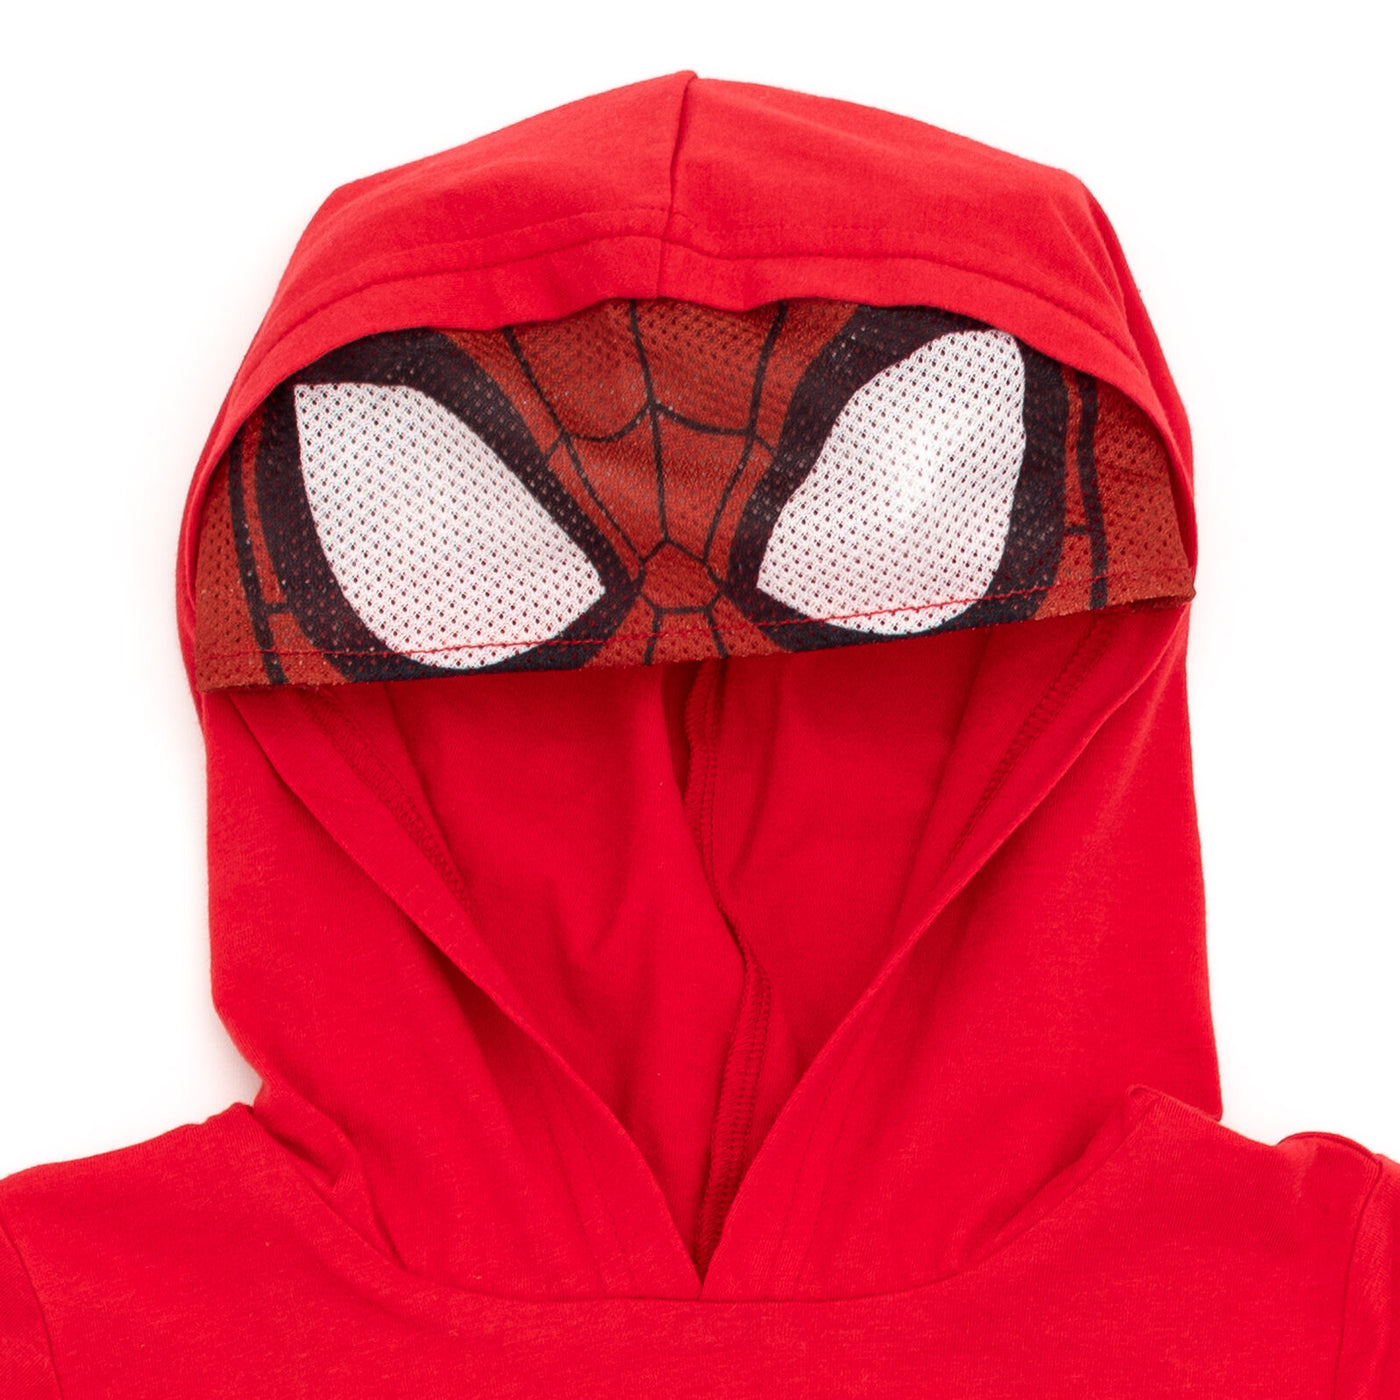 Marvel Spider-Man Cosplay T-Shirt and Mesh Shorts Outfit Set